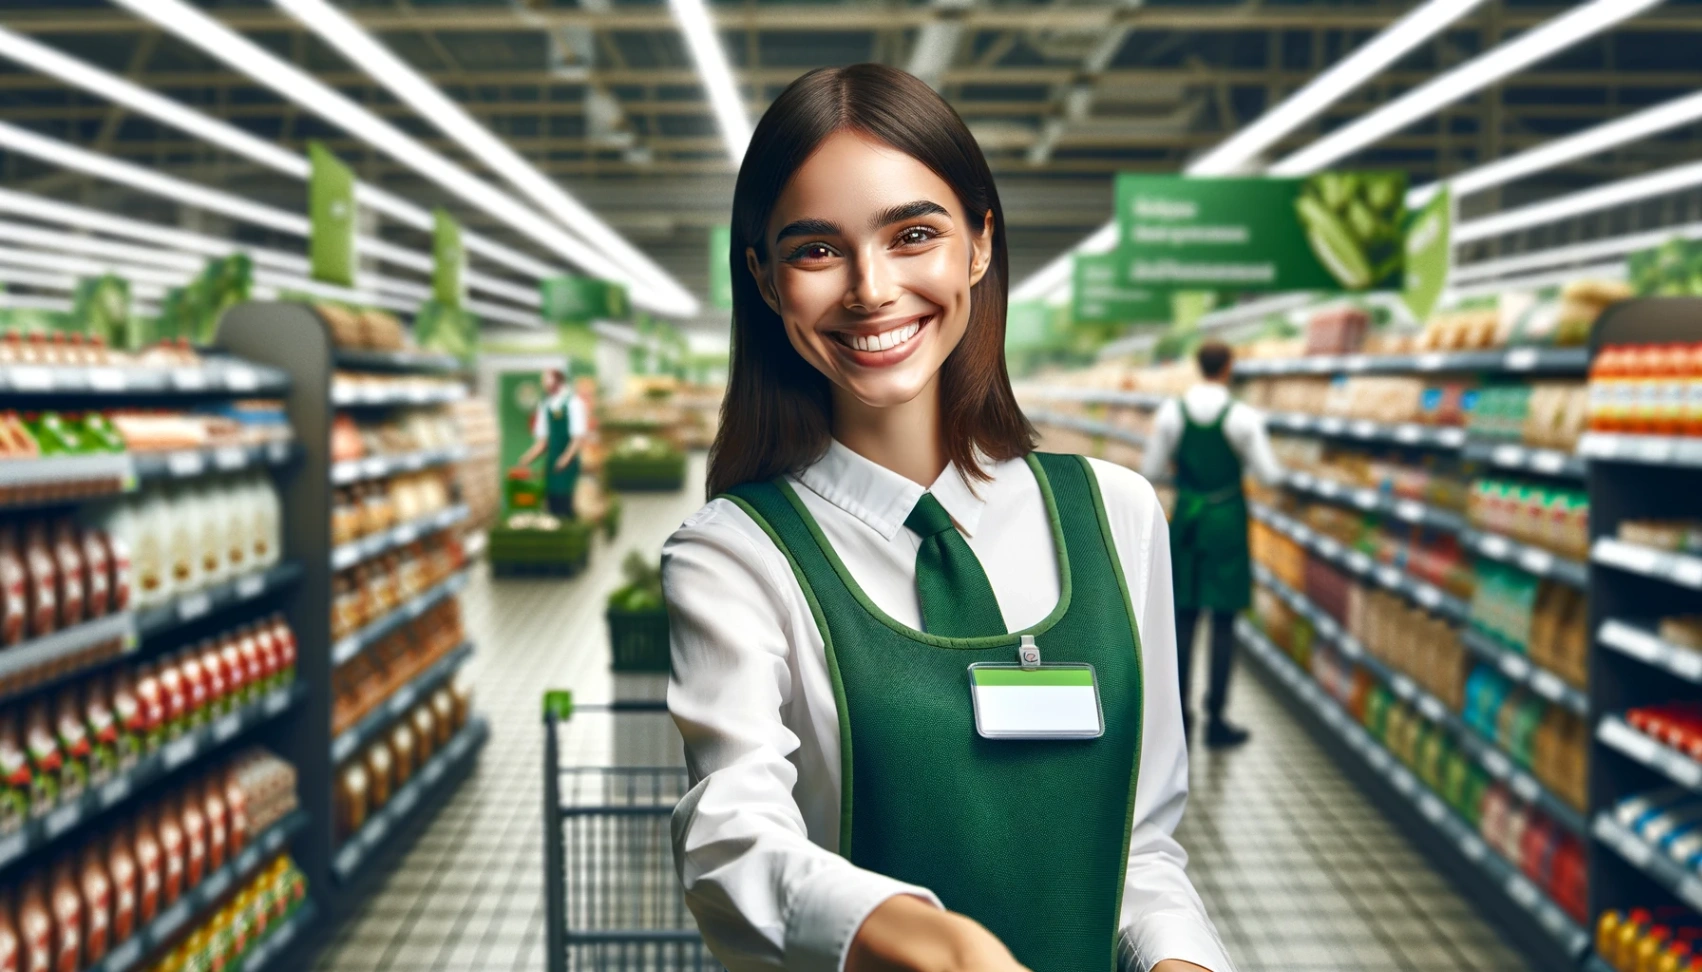 Publix Super Markets Careers: Learn How to Apply 